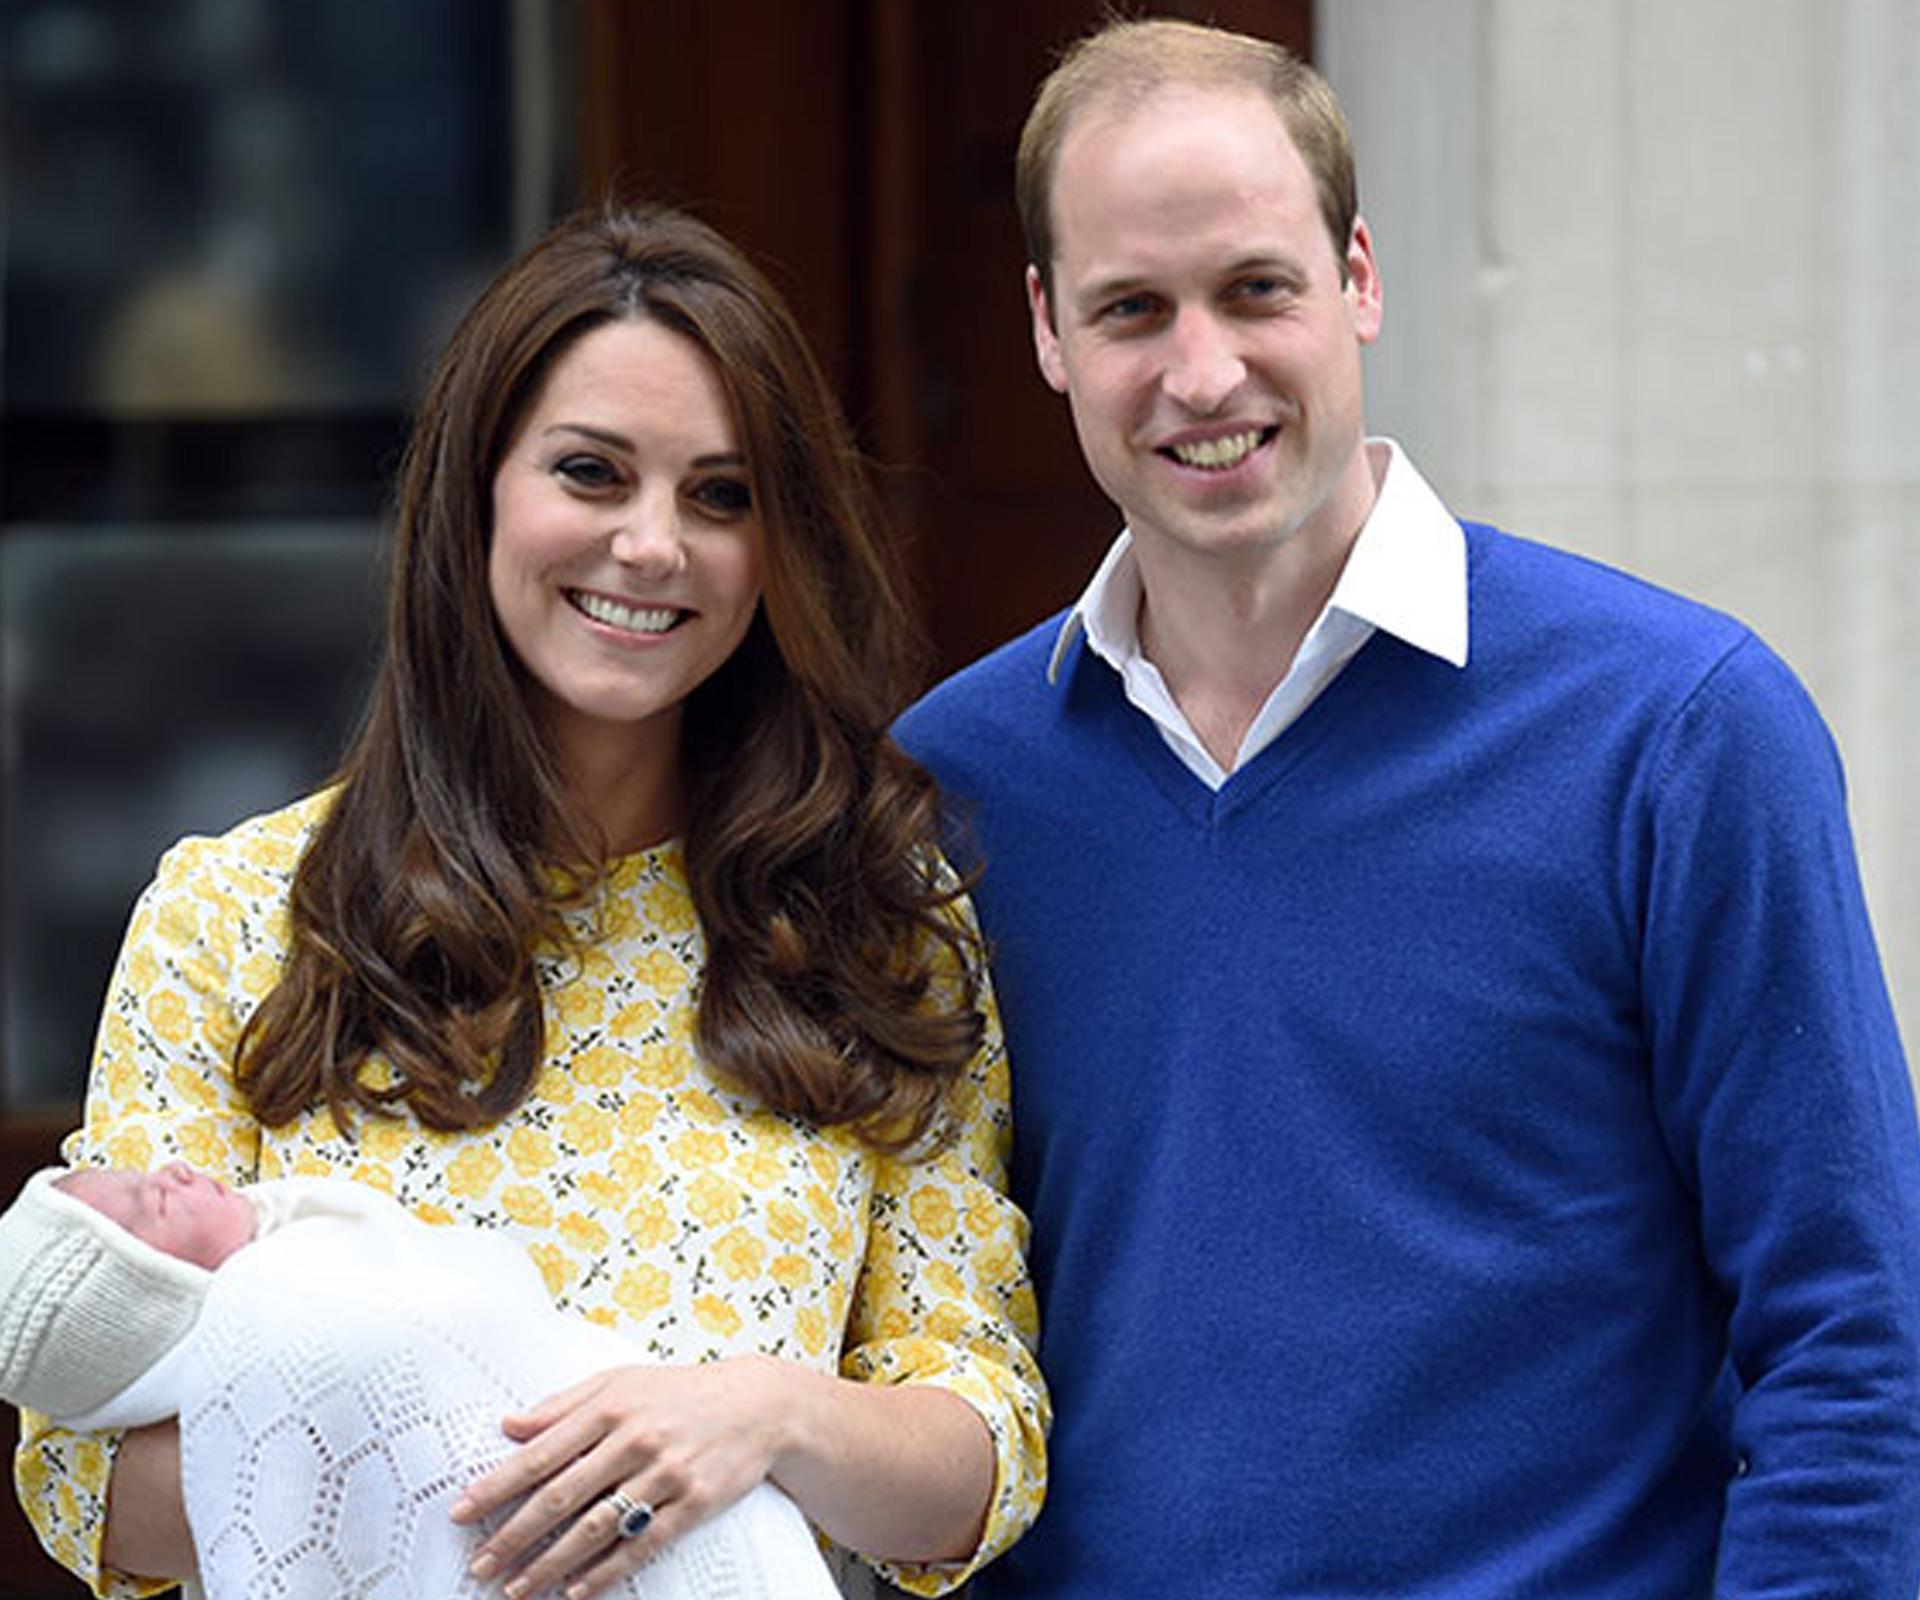 Royal baby: The Duke and Duchess debut their baby girl!